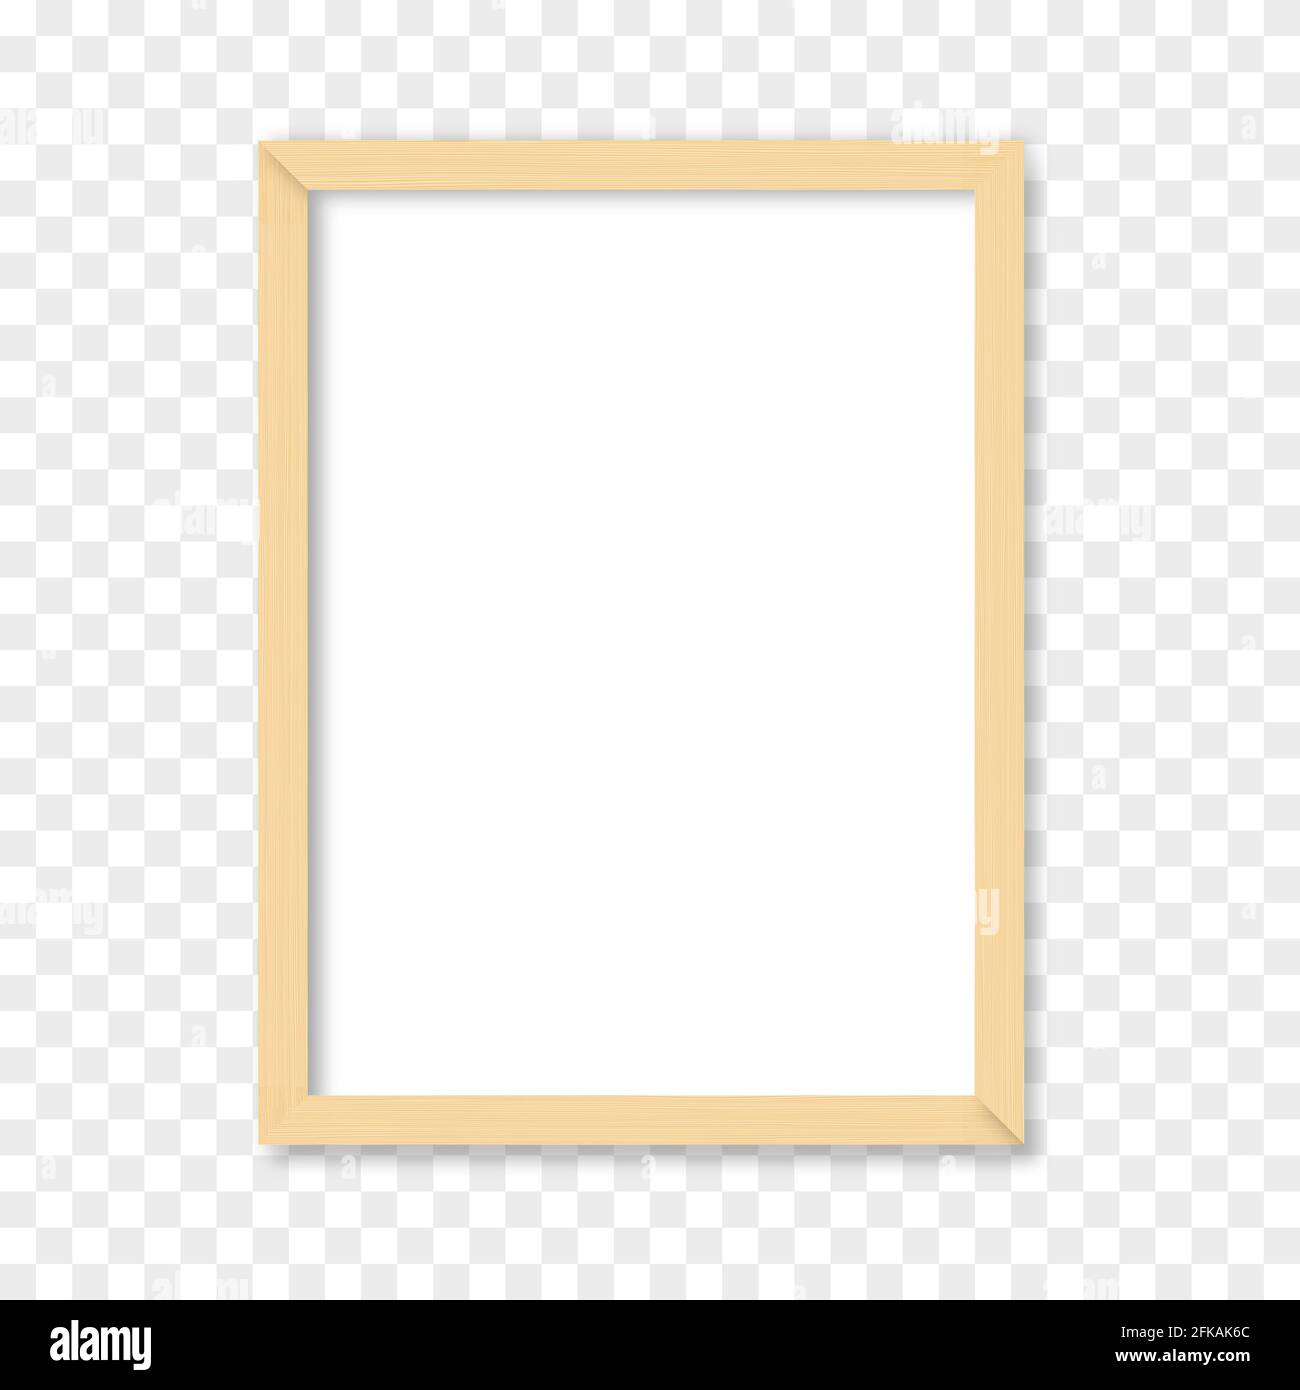 https://c8.alamy.com/comp/2FKAK6C/white-blank-picture-with-wooden-frame-realistic-vertical-picture-frame-mockup-template-vector-illustration-isolated-on-transparent-background-2FKAK6C.jpg